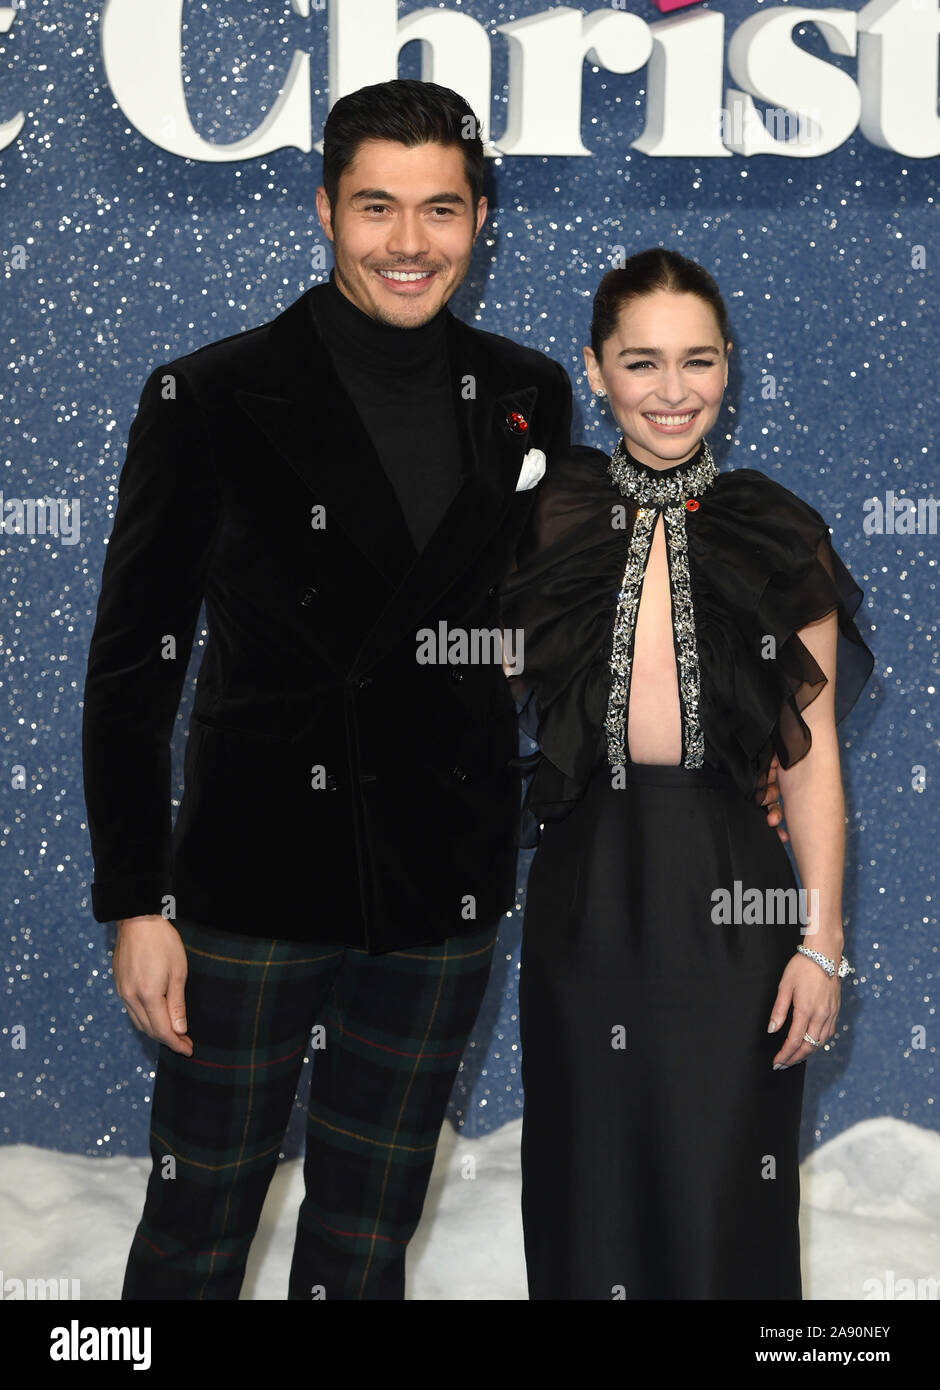 Photo Must Be Credited ©Alpha Press 079965 11/11/2019 Henry Golding and Emilia Clarke Last Christmas UK Premiere At BFI Southbank London Stock Photo